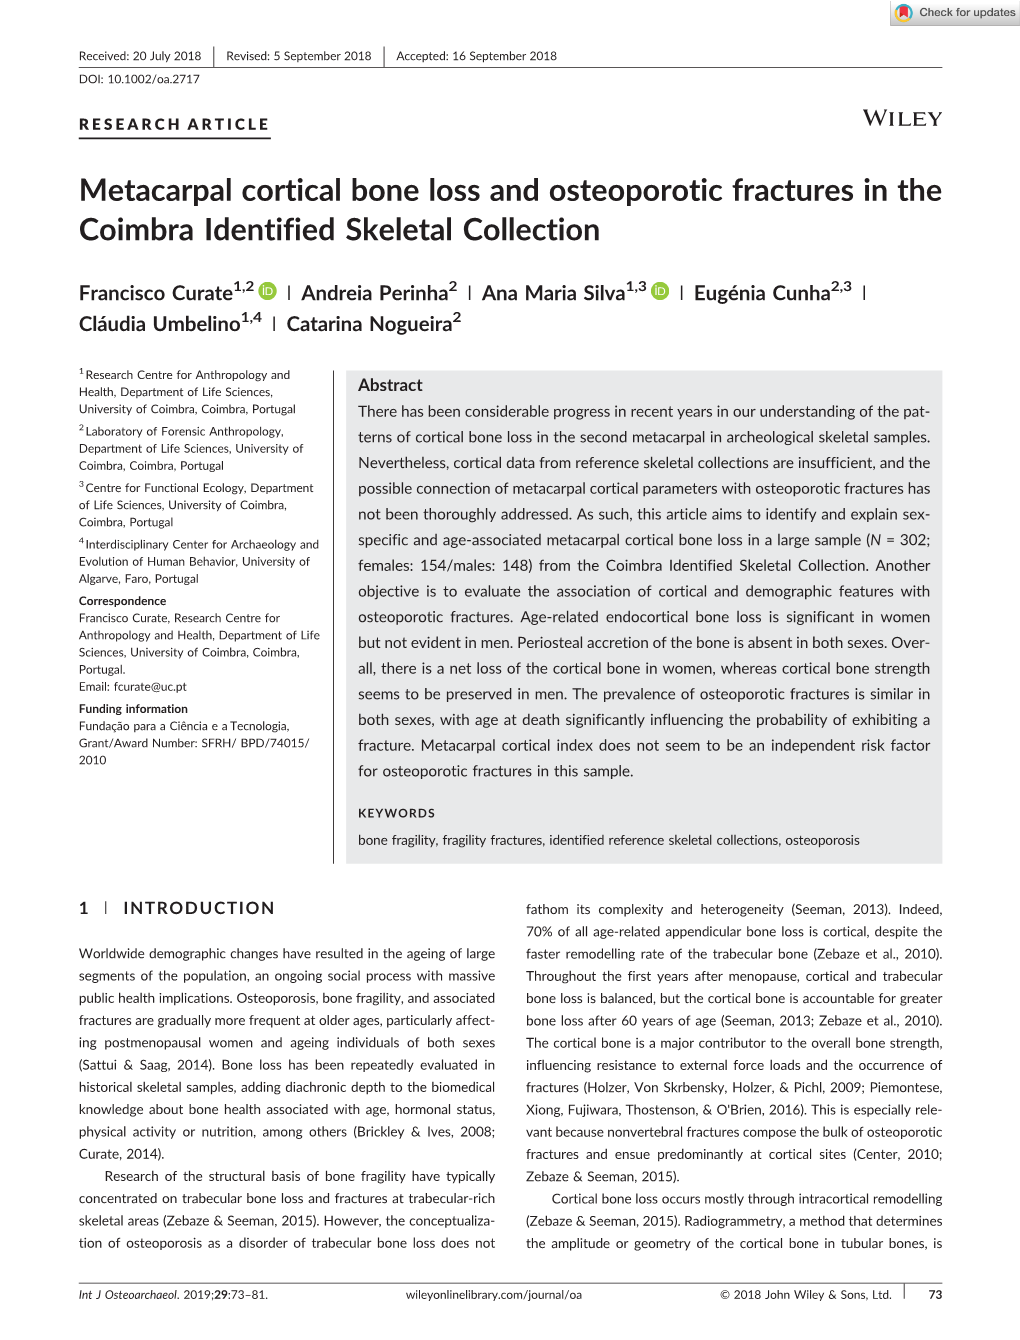 Metacarpal Cortical Bone Loss and Osteoporotic Fractures in the Coimbra Identified Skeletal Collection